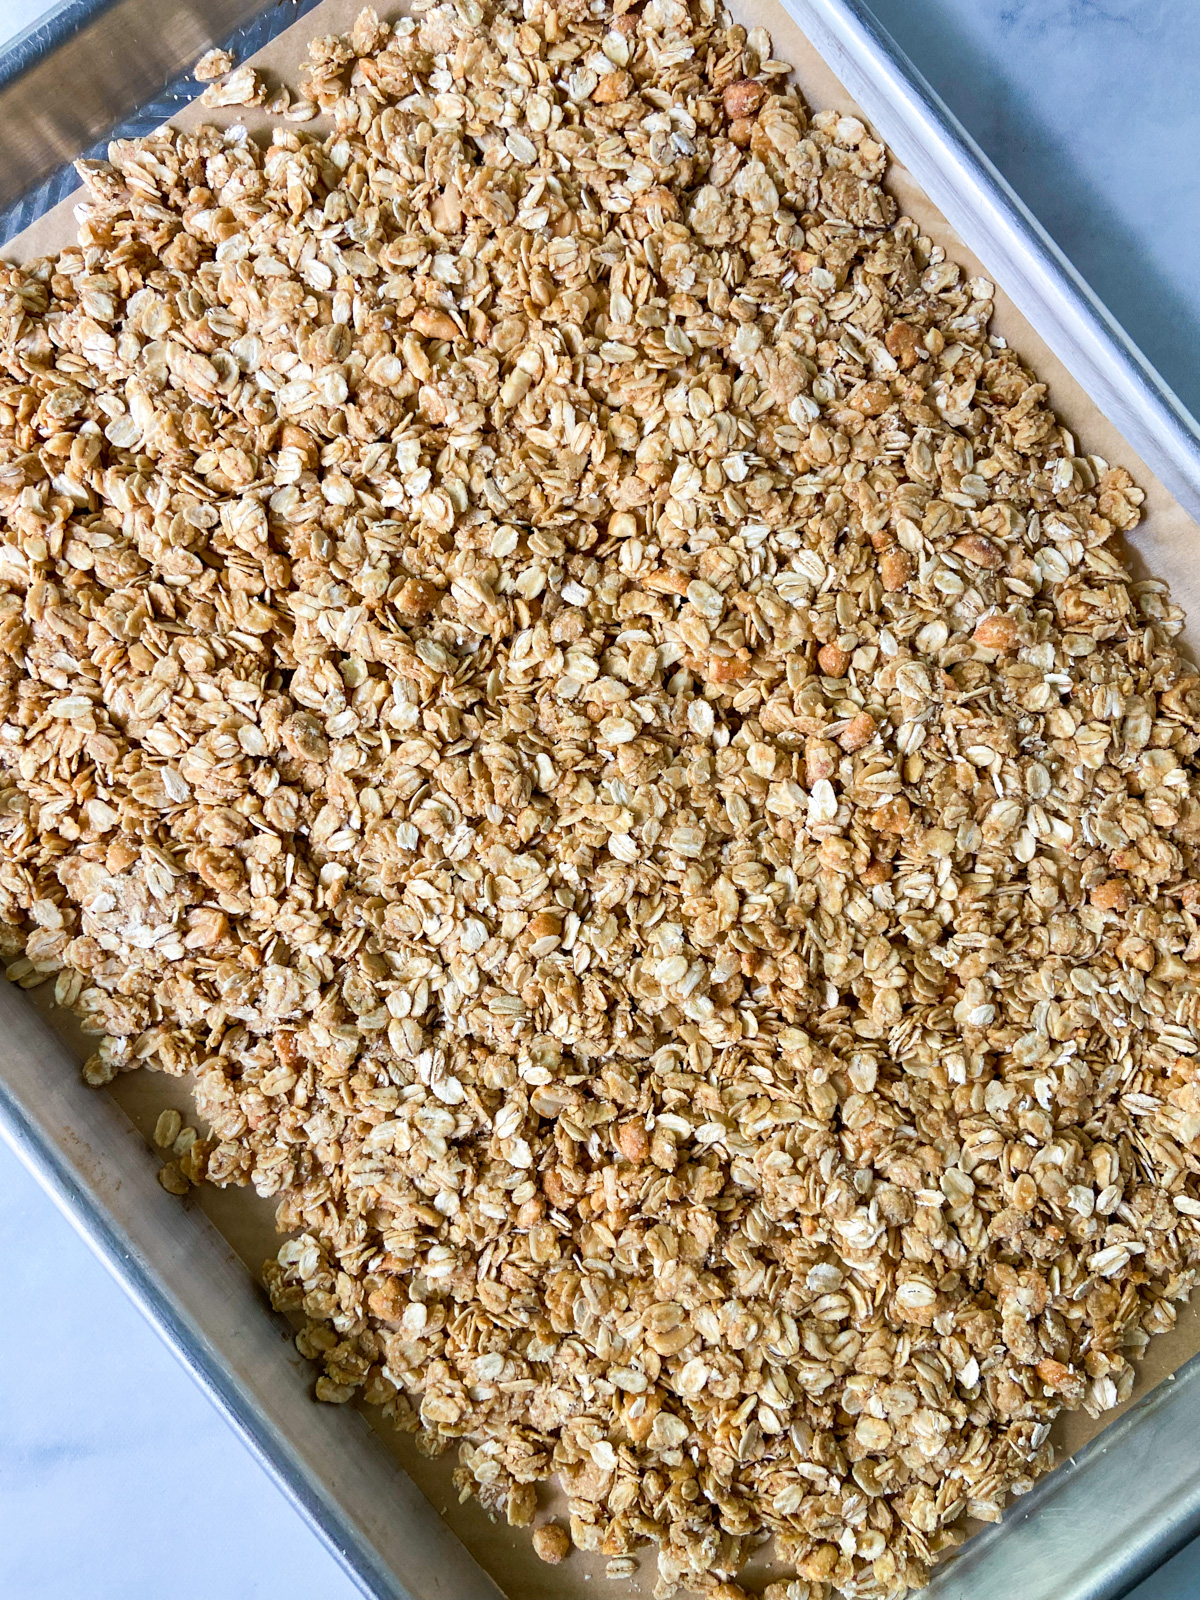 Baked granola on a parchment-lined tray.